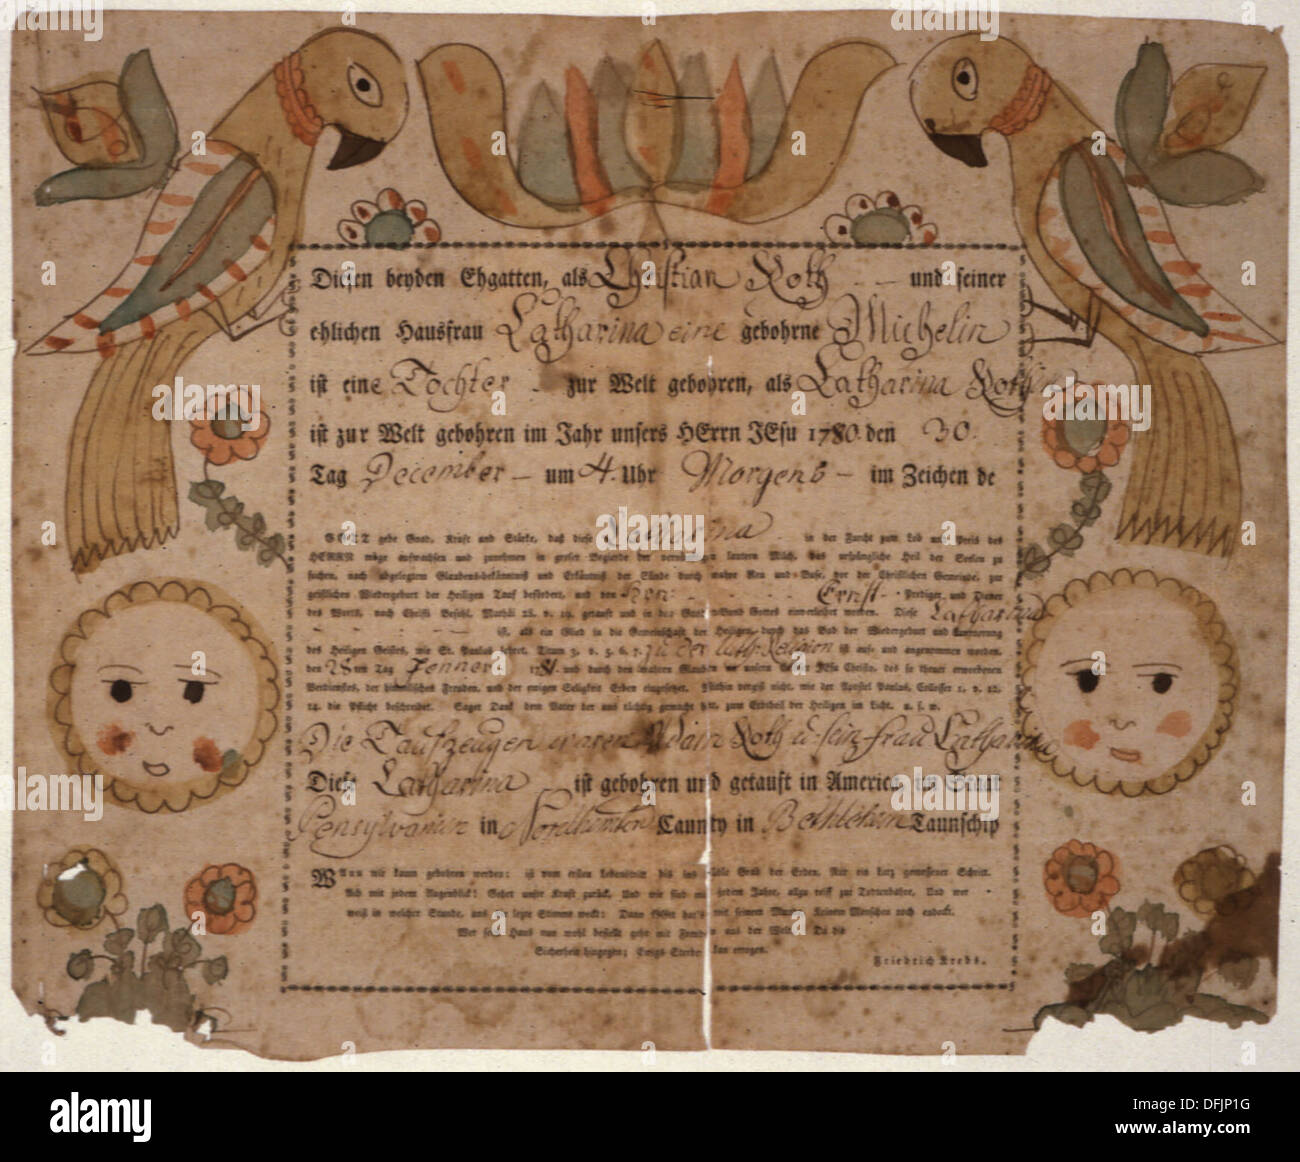 Illustrated family record (Fraktur) found in Revolutionary War Pension and Bounty-Land-Warrant Application File... 300068 Stock Photo